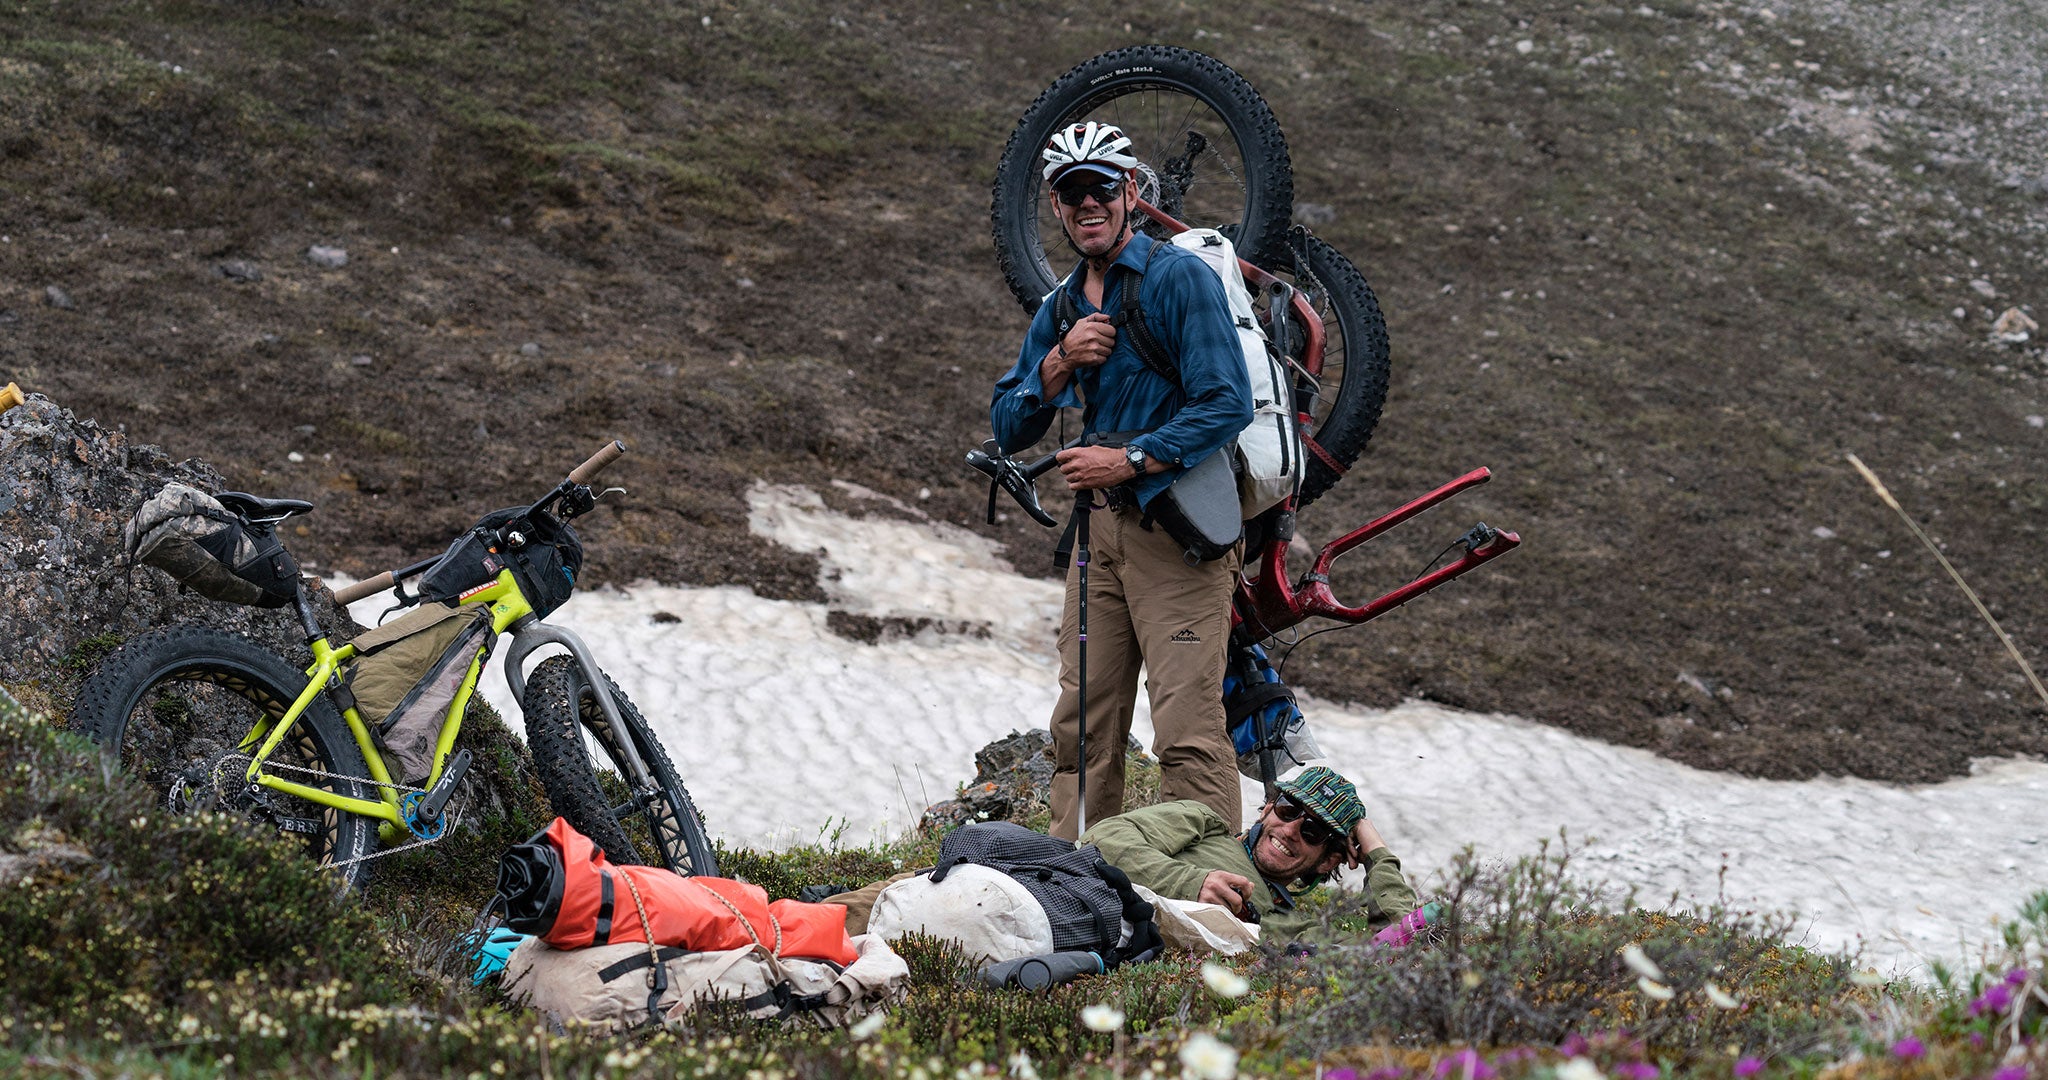 Ultralight bikepackers pose for the camera